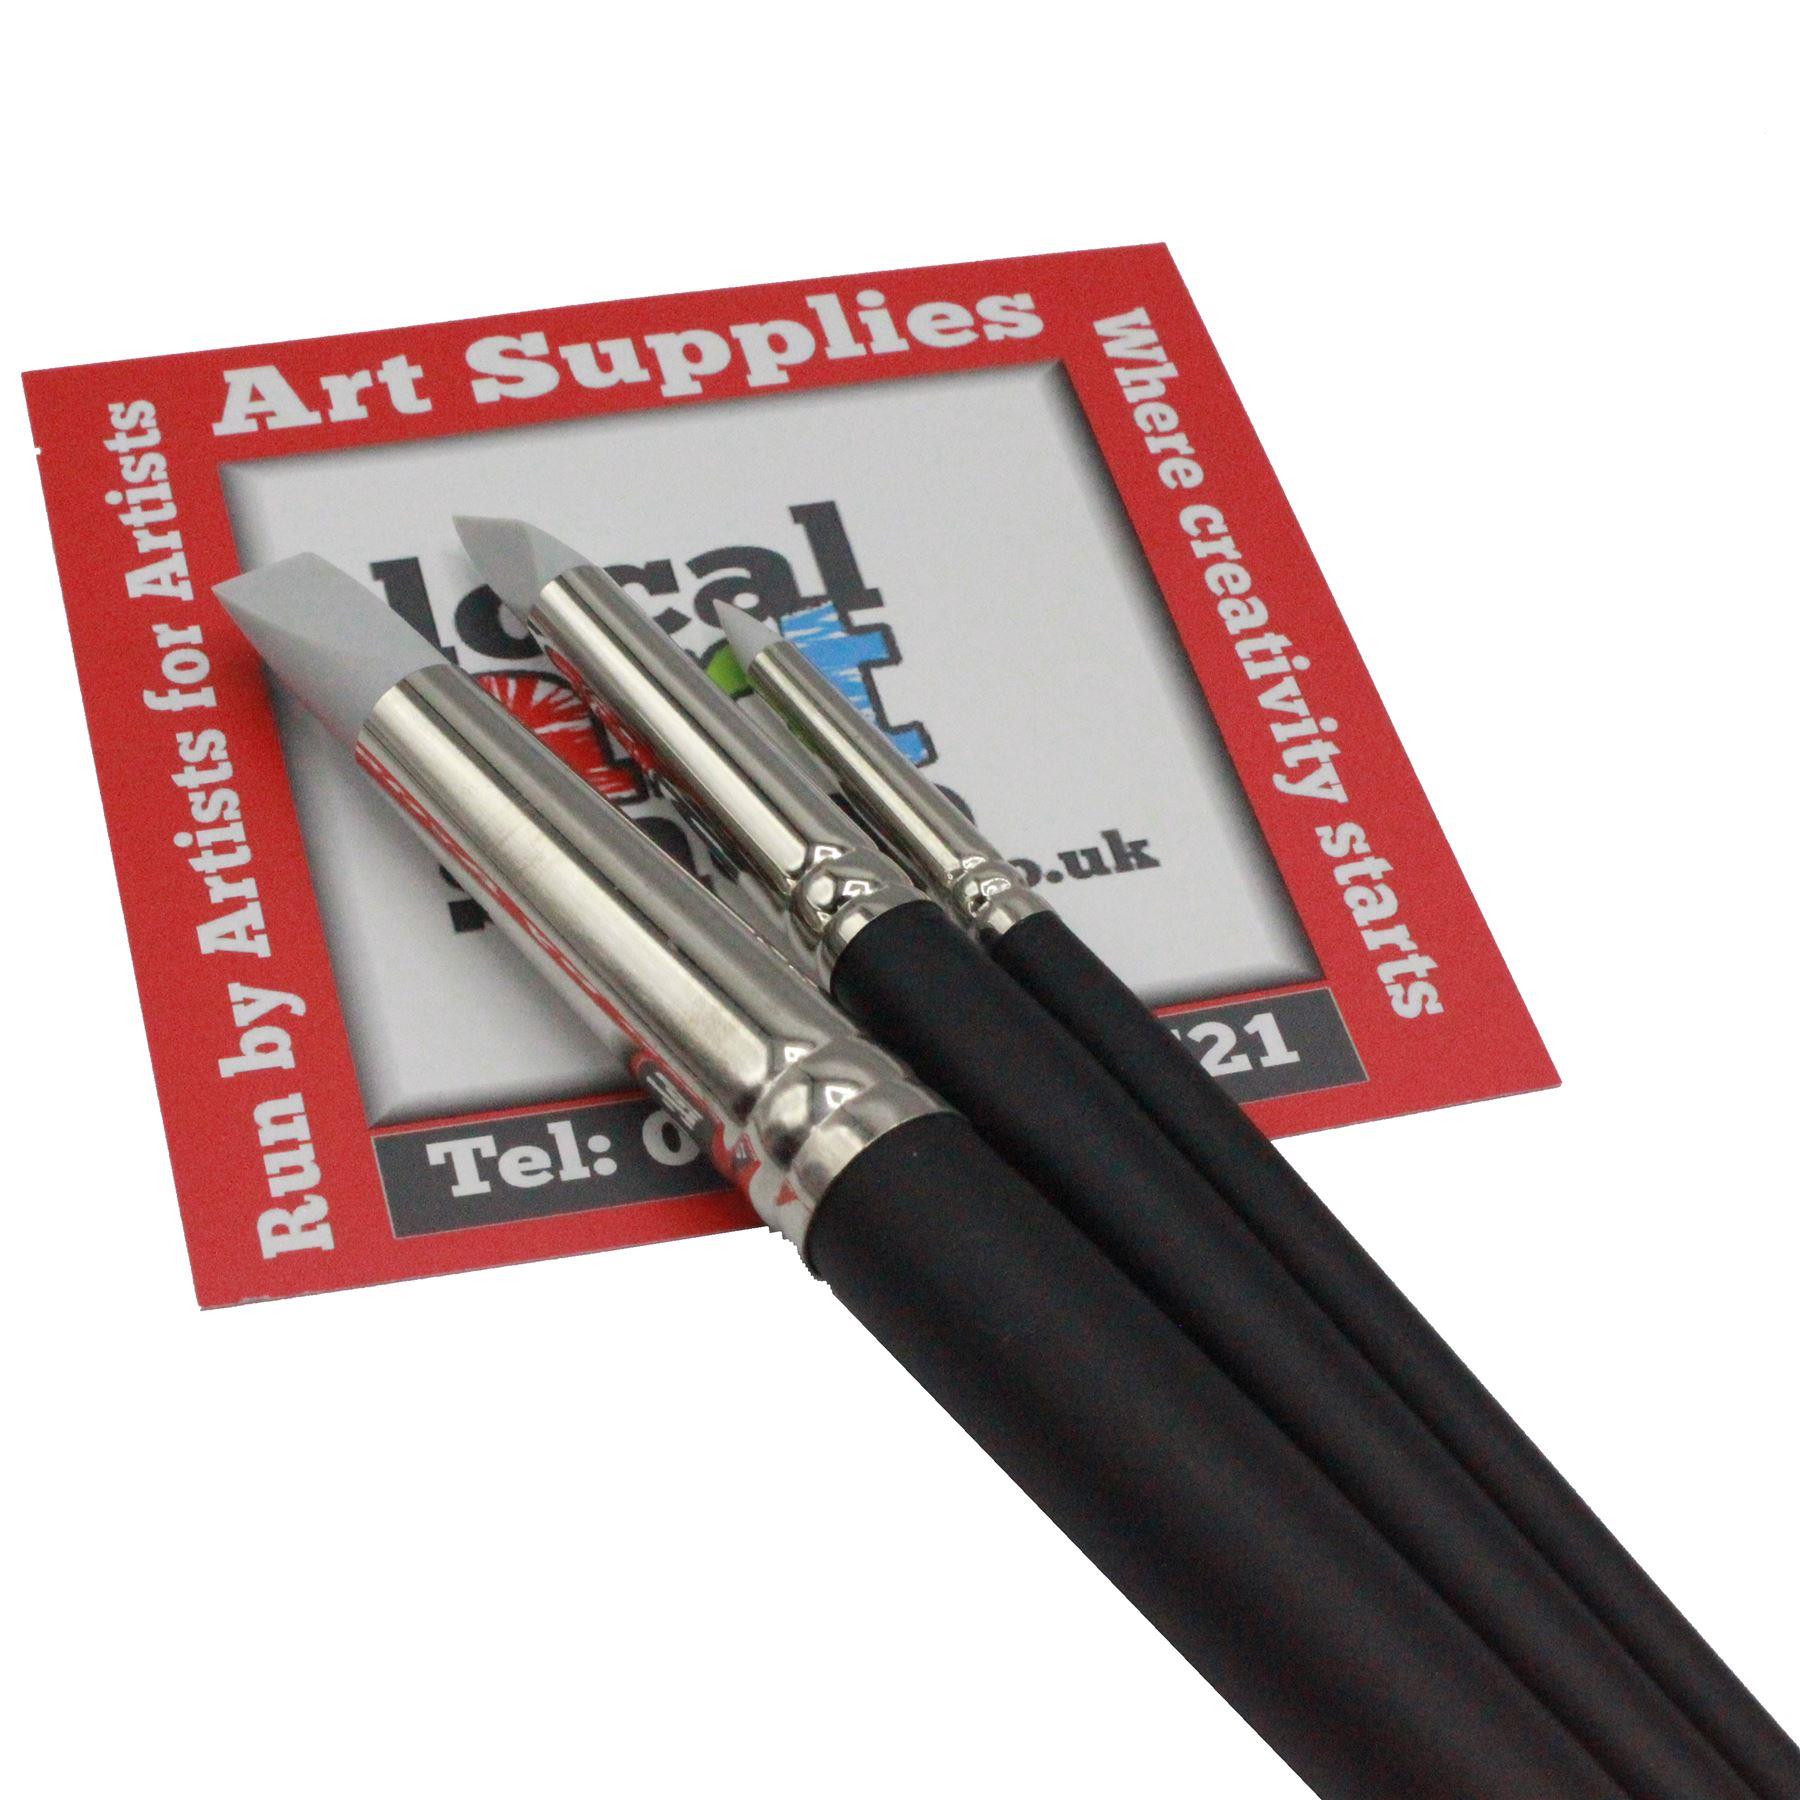 Talens silcon tip artists paint brushes